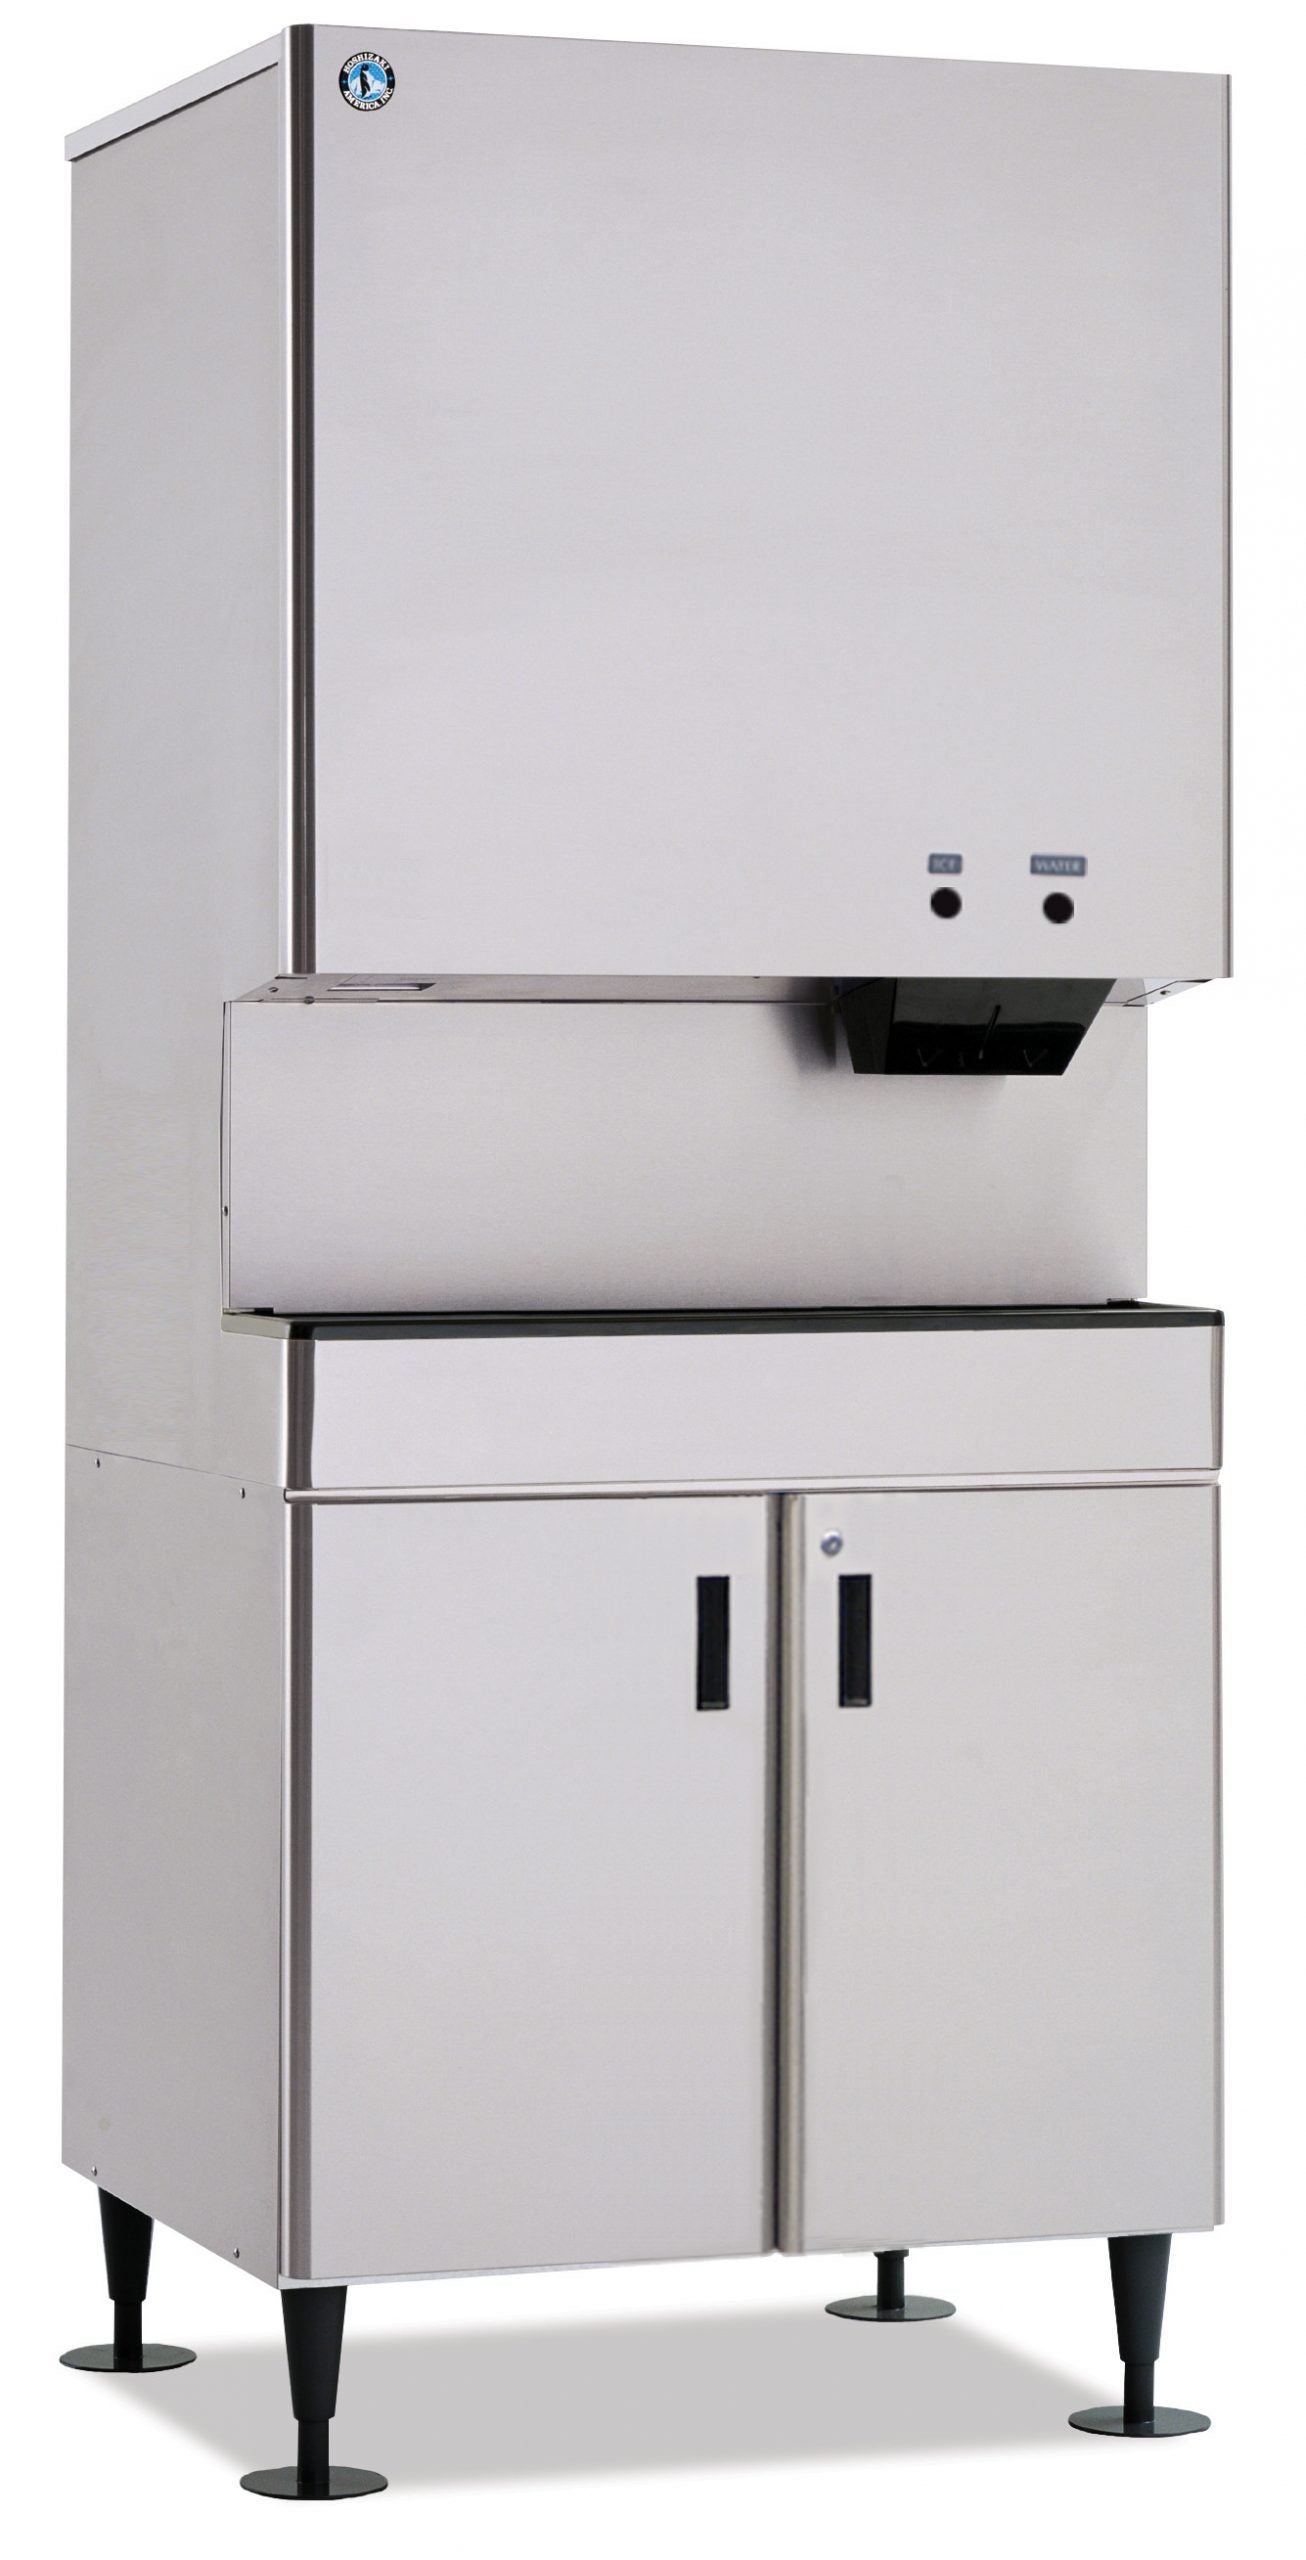 Hoshizaki DCM-751BWH | 34" Wide Water-Cooled Small Cubelet Ice & Water Dispenser w/ Built-In Storage Bin